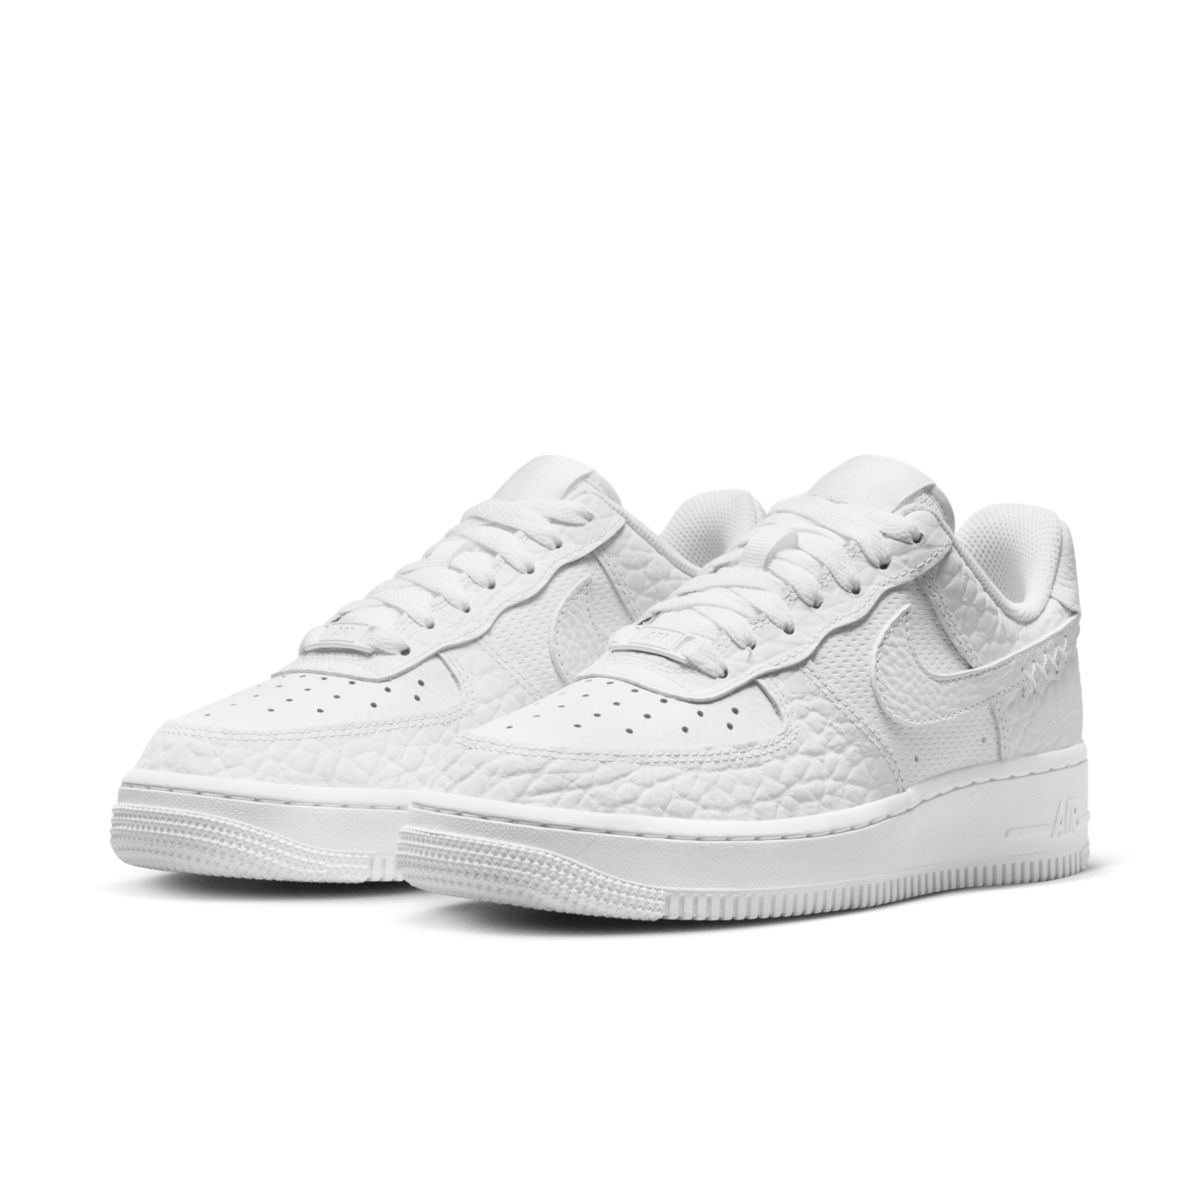 Nike Air Force 1 Low WMNS Color of The Month White Metallic Gold DZ4711-100 4